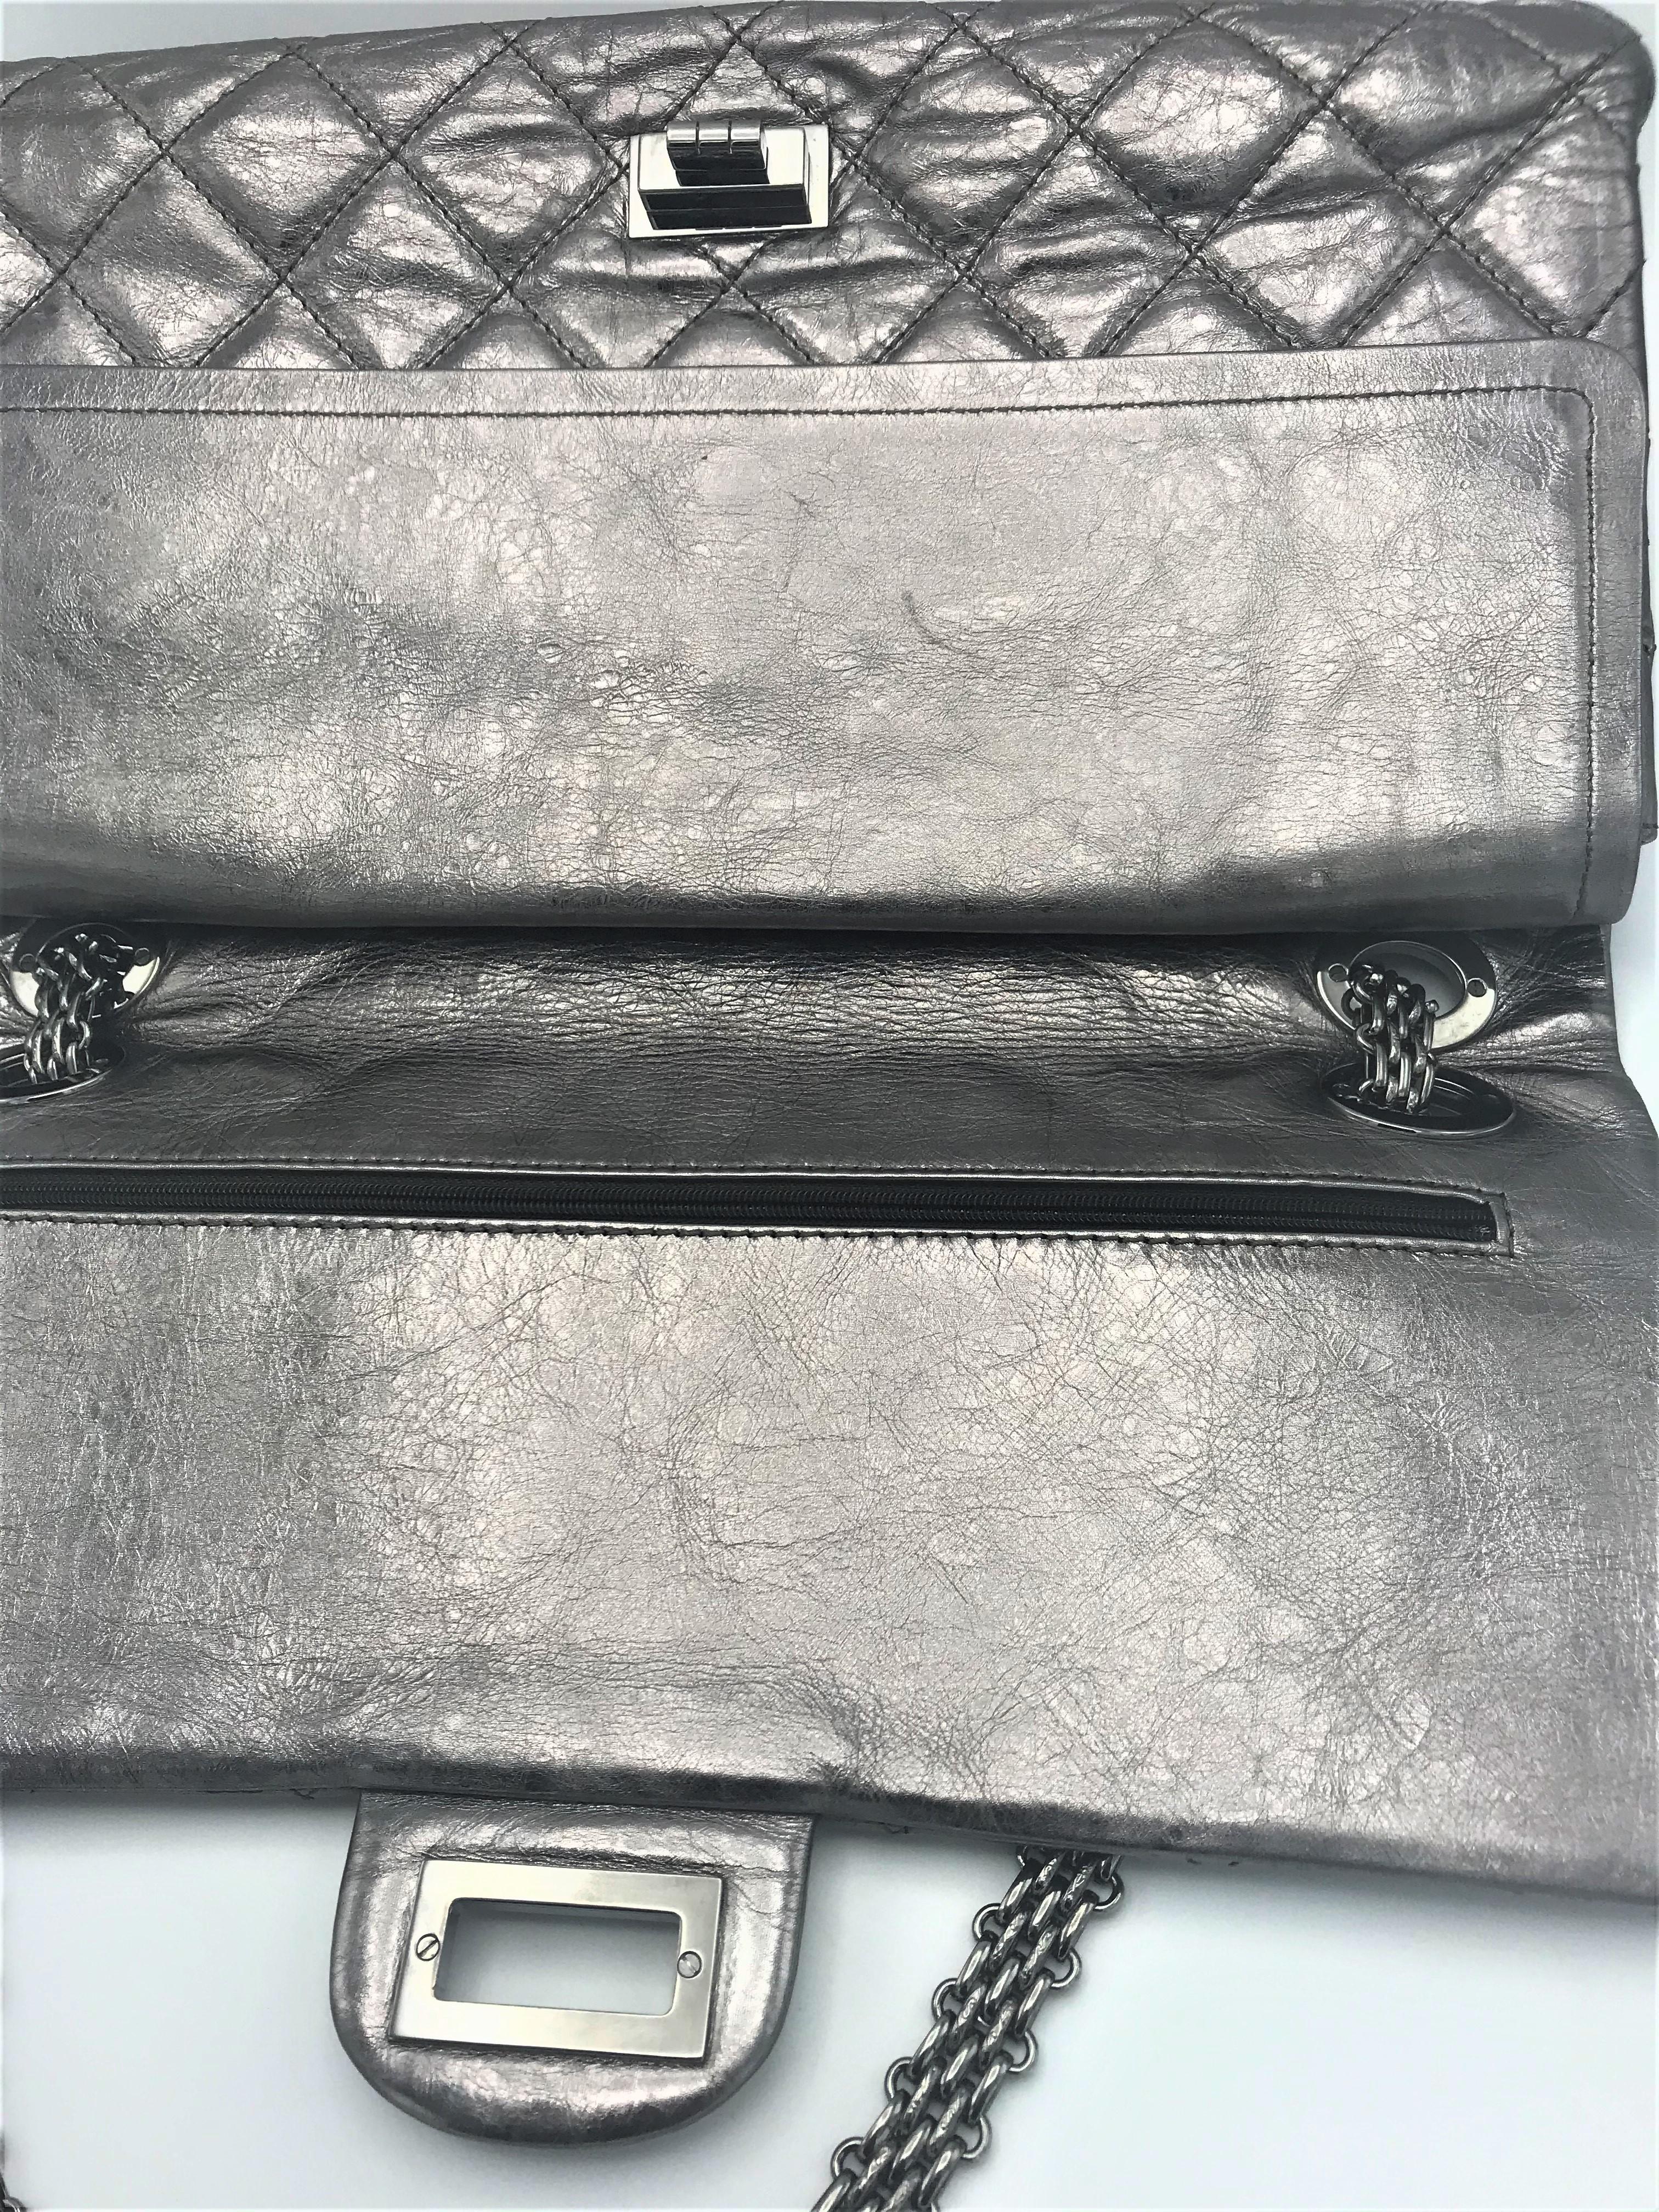 Chanel leather distressed silver Reissure 2, 55 maxi double flap bag 2000s   In Excellent Condition For Sale In Stuttgart, DE